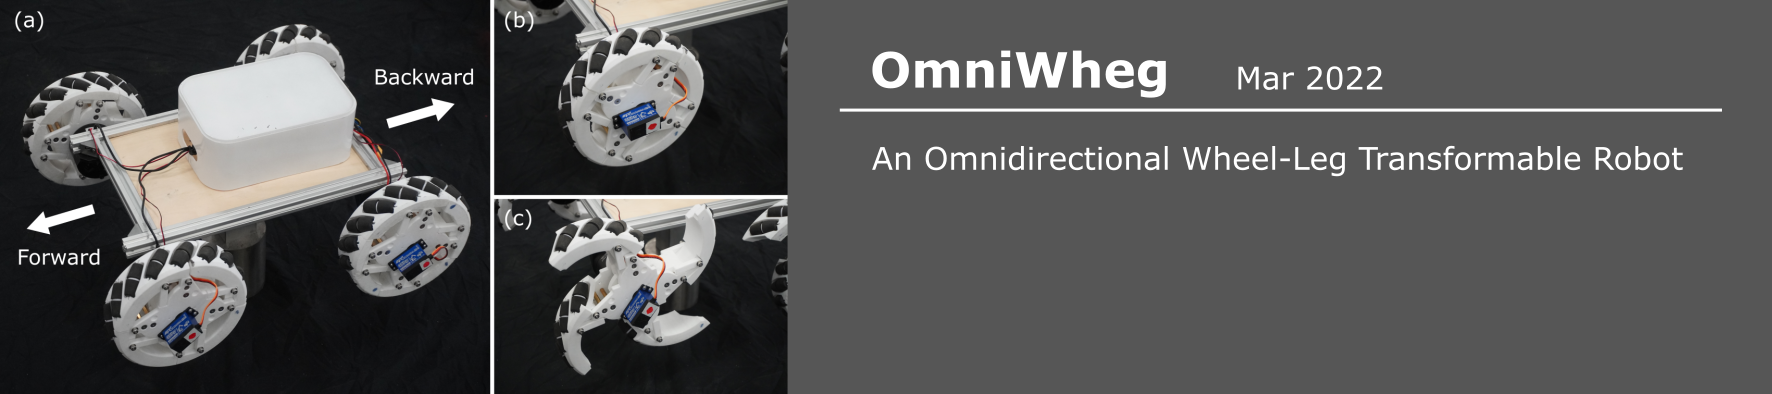 omniwheg.png